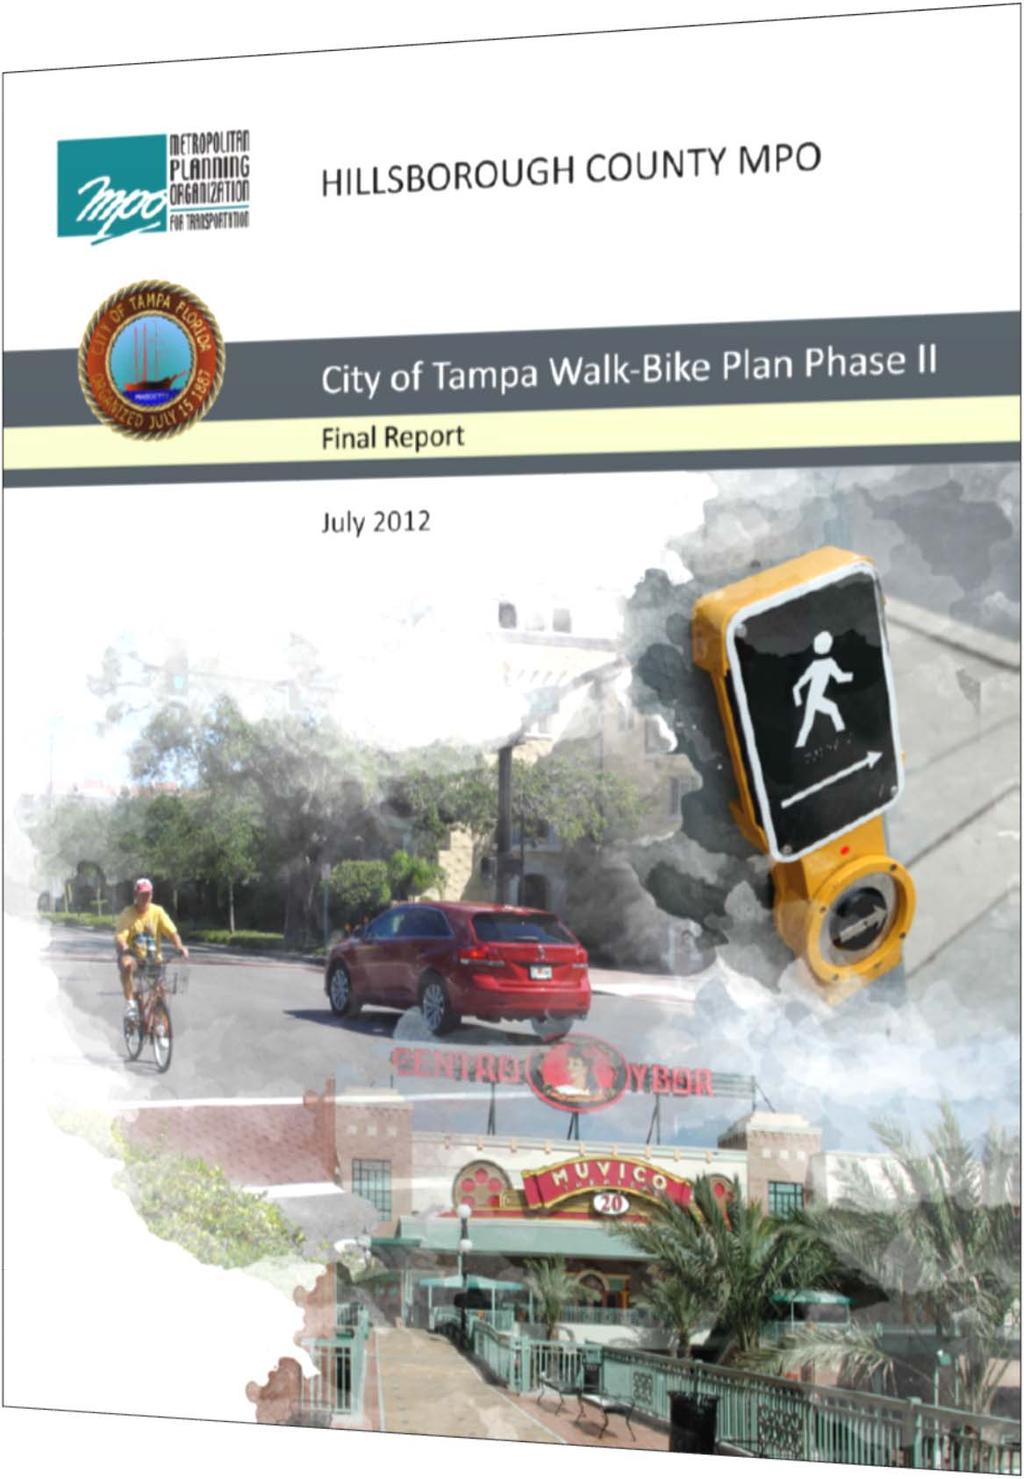 How did this Project Originate? City of Tampa Walk Bike Plan, 2012 Multi Phased plan to identify opportunities for enhanced bicycle and pedestrian mobility throughout the City.